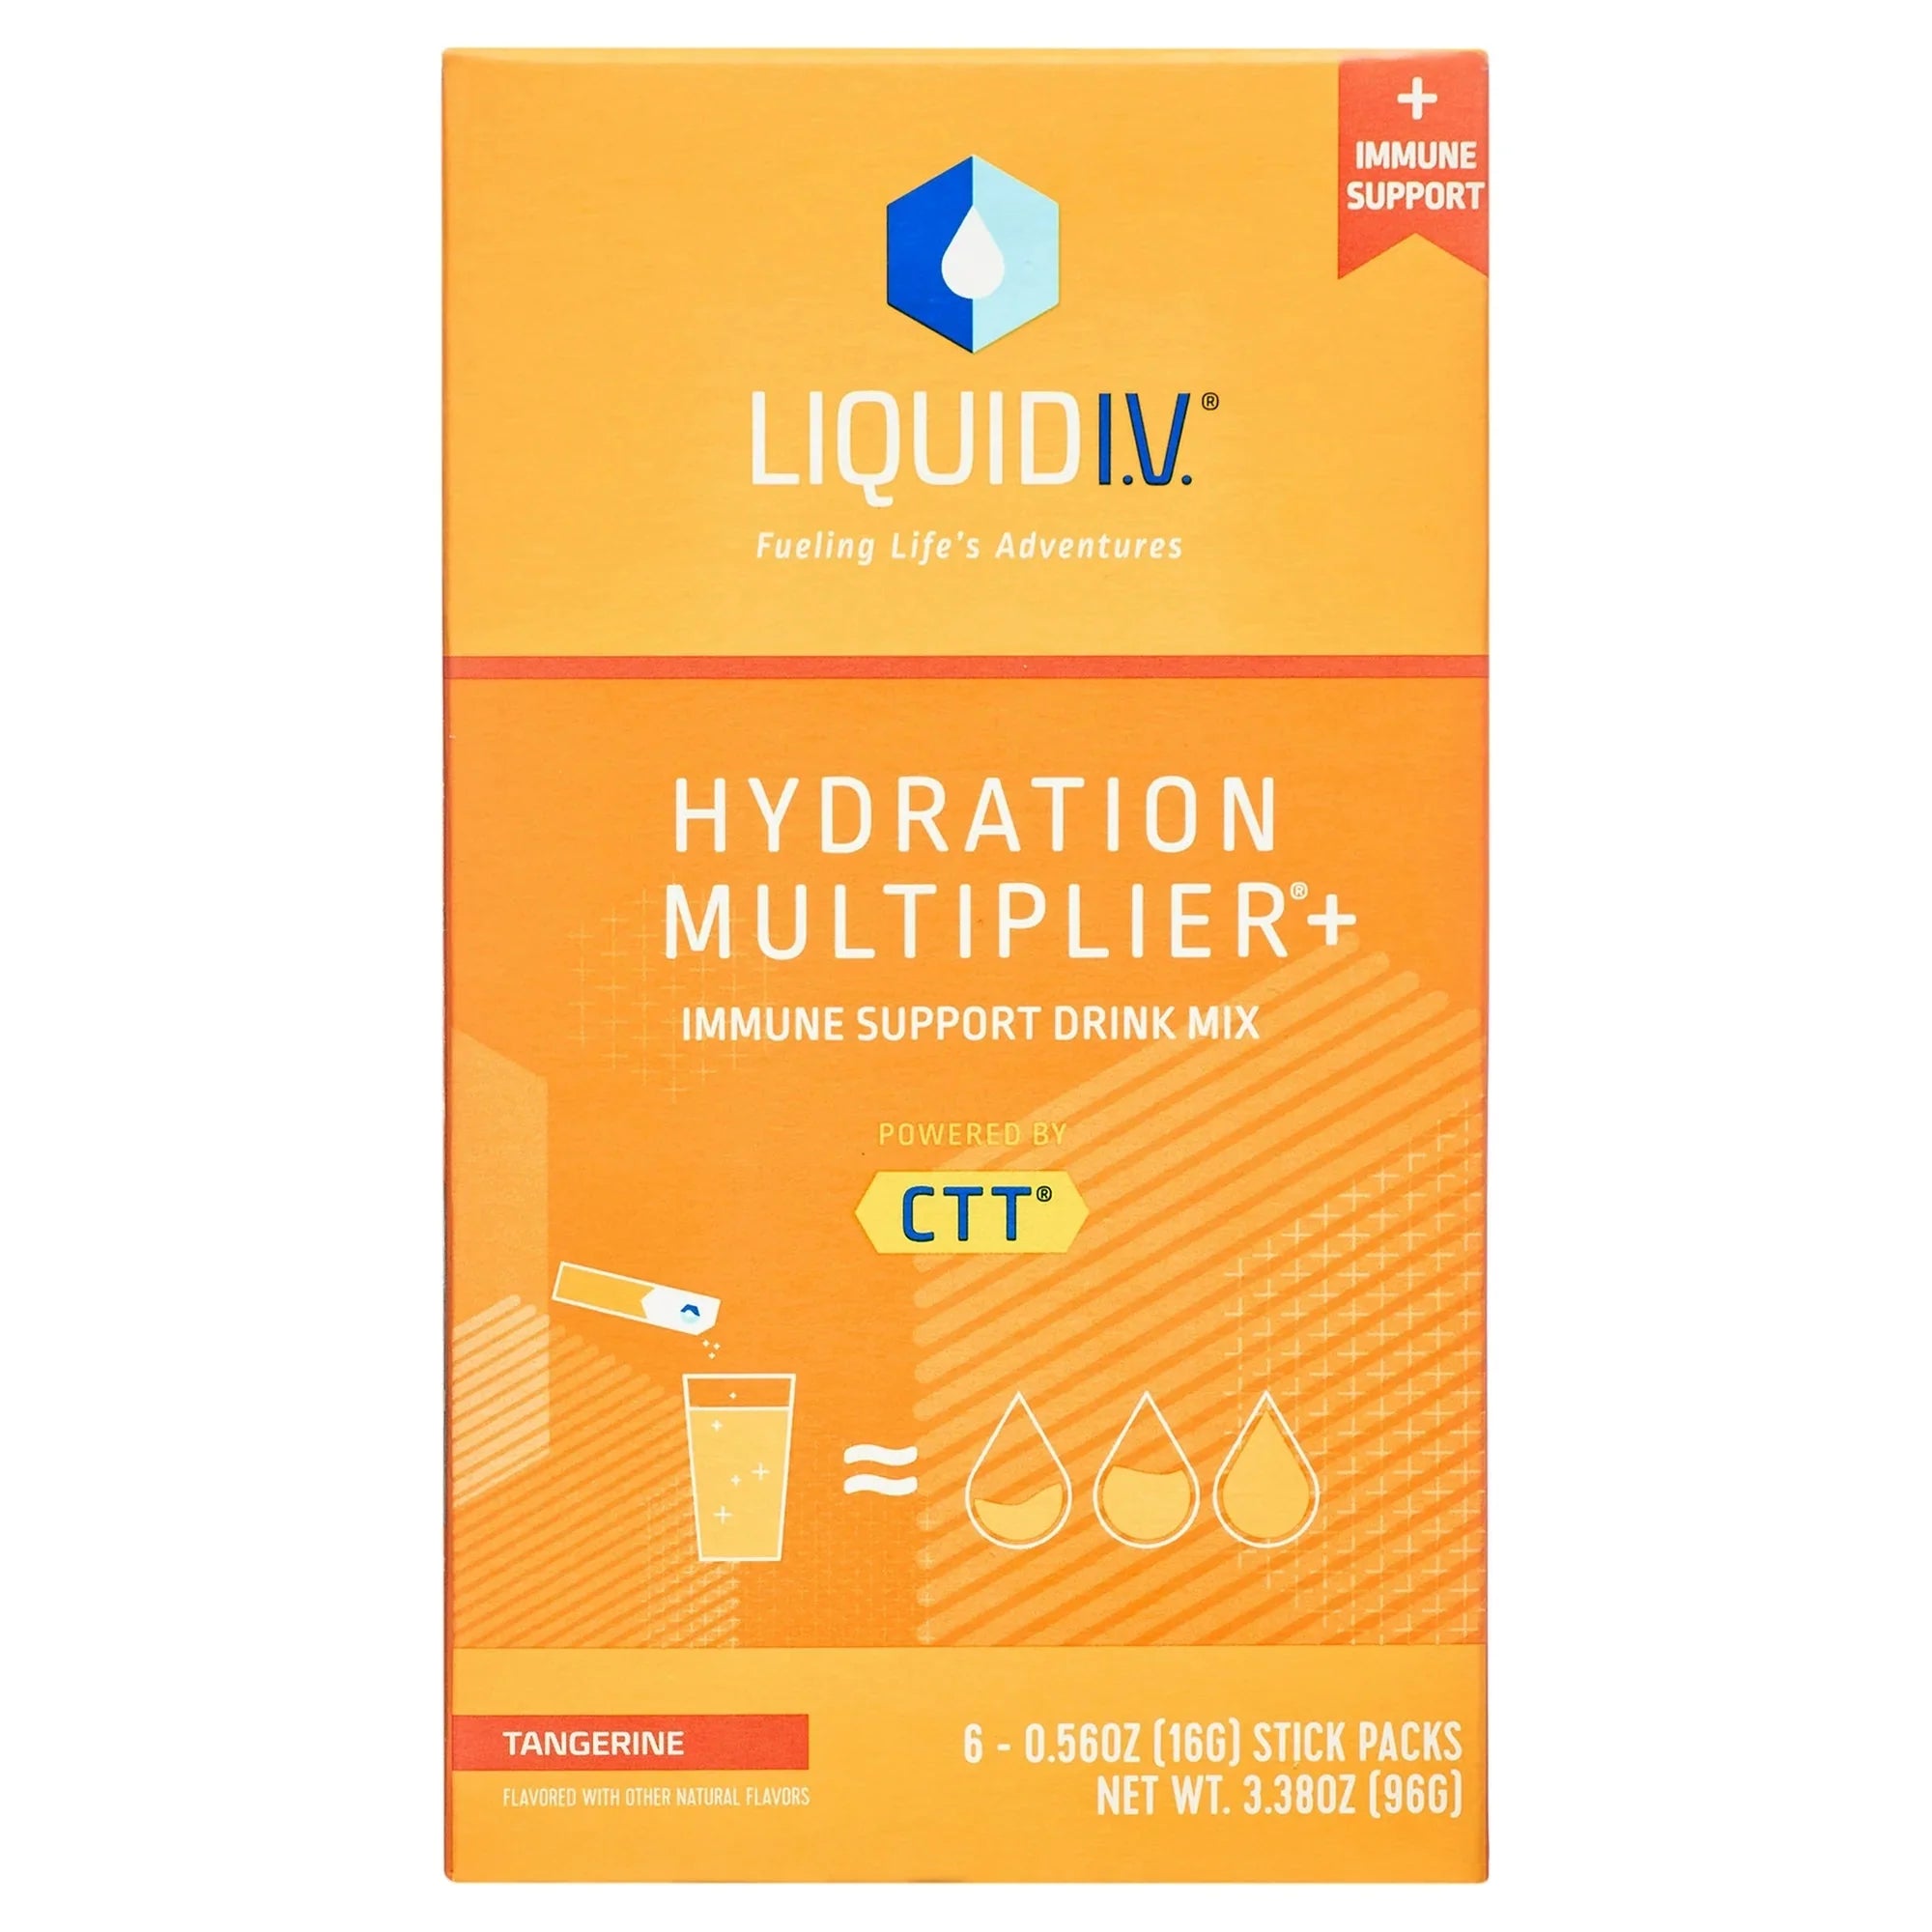 Wholesale prices with free shipping all over United States Liquid I.V. Hydration Multiplier+ Immune Support Electrolyte Powder Packet Drink Mix, Tangerine, 6 Ct - Steven Deals